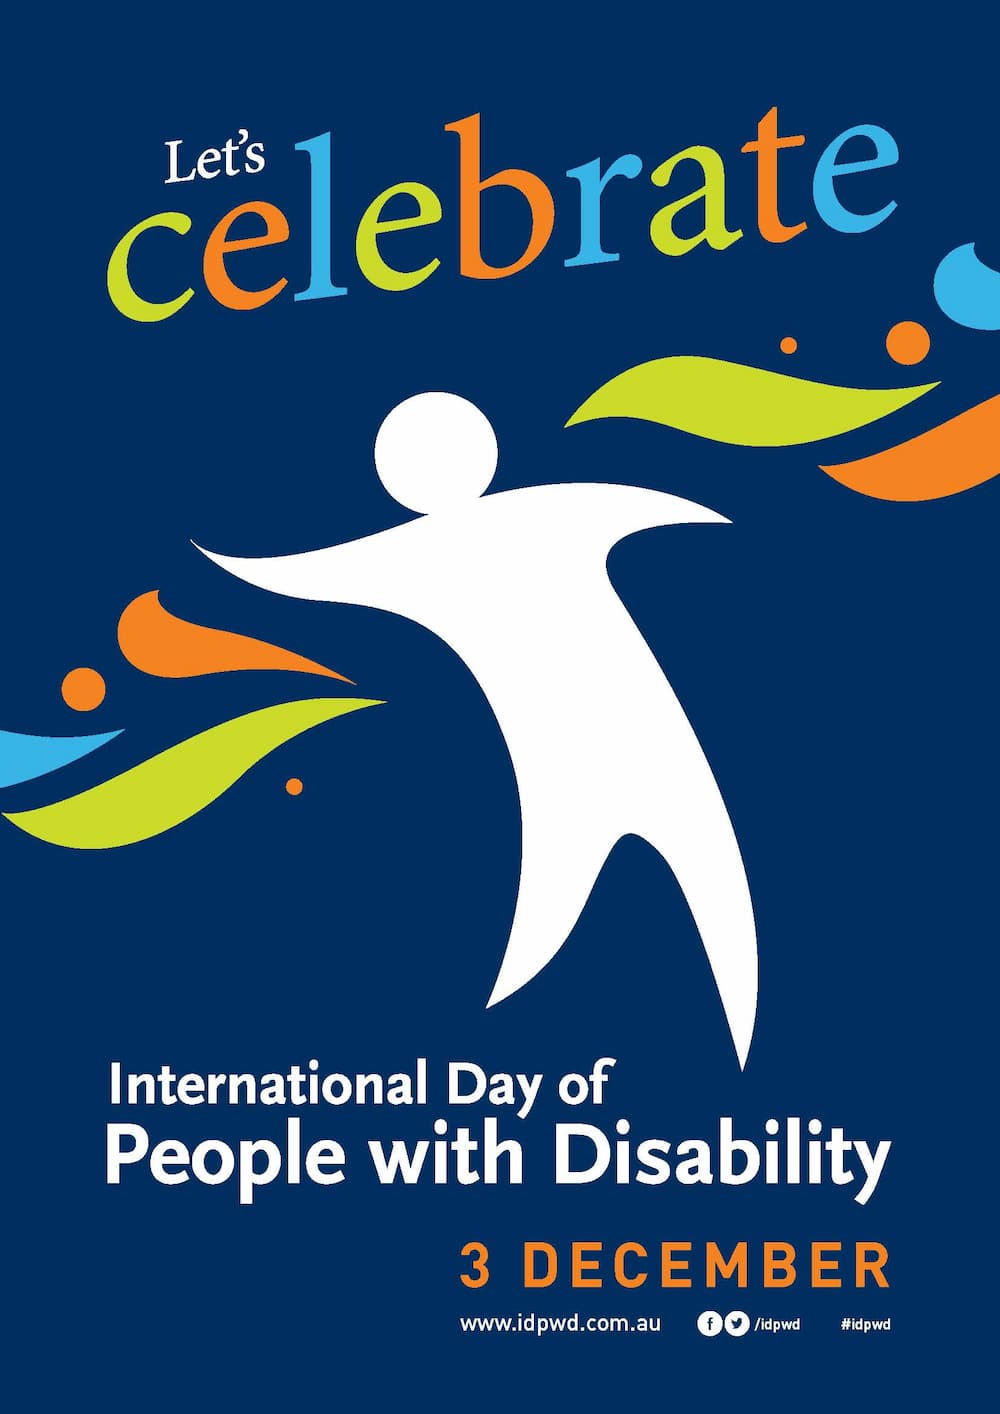 International Day of People with Disability (IDPwD) 2019